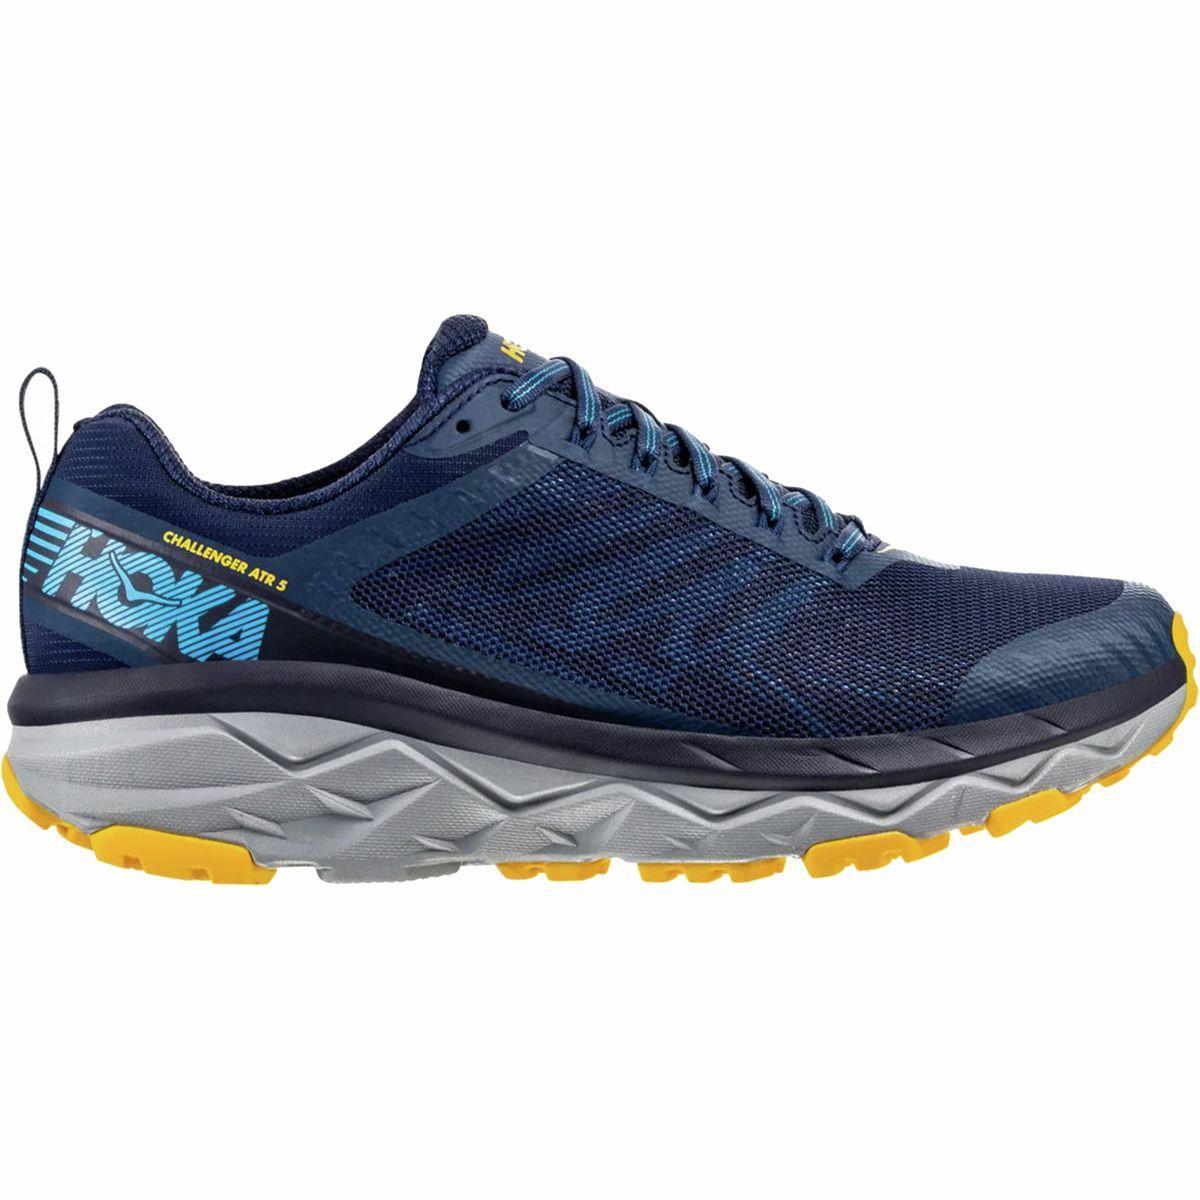 Hoka One One Lace Challenger Atr 5 Running Shoe in Blue for Men - Lyst